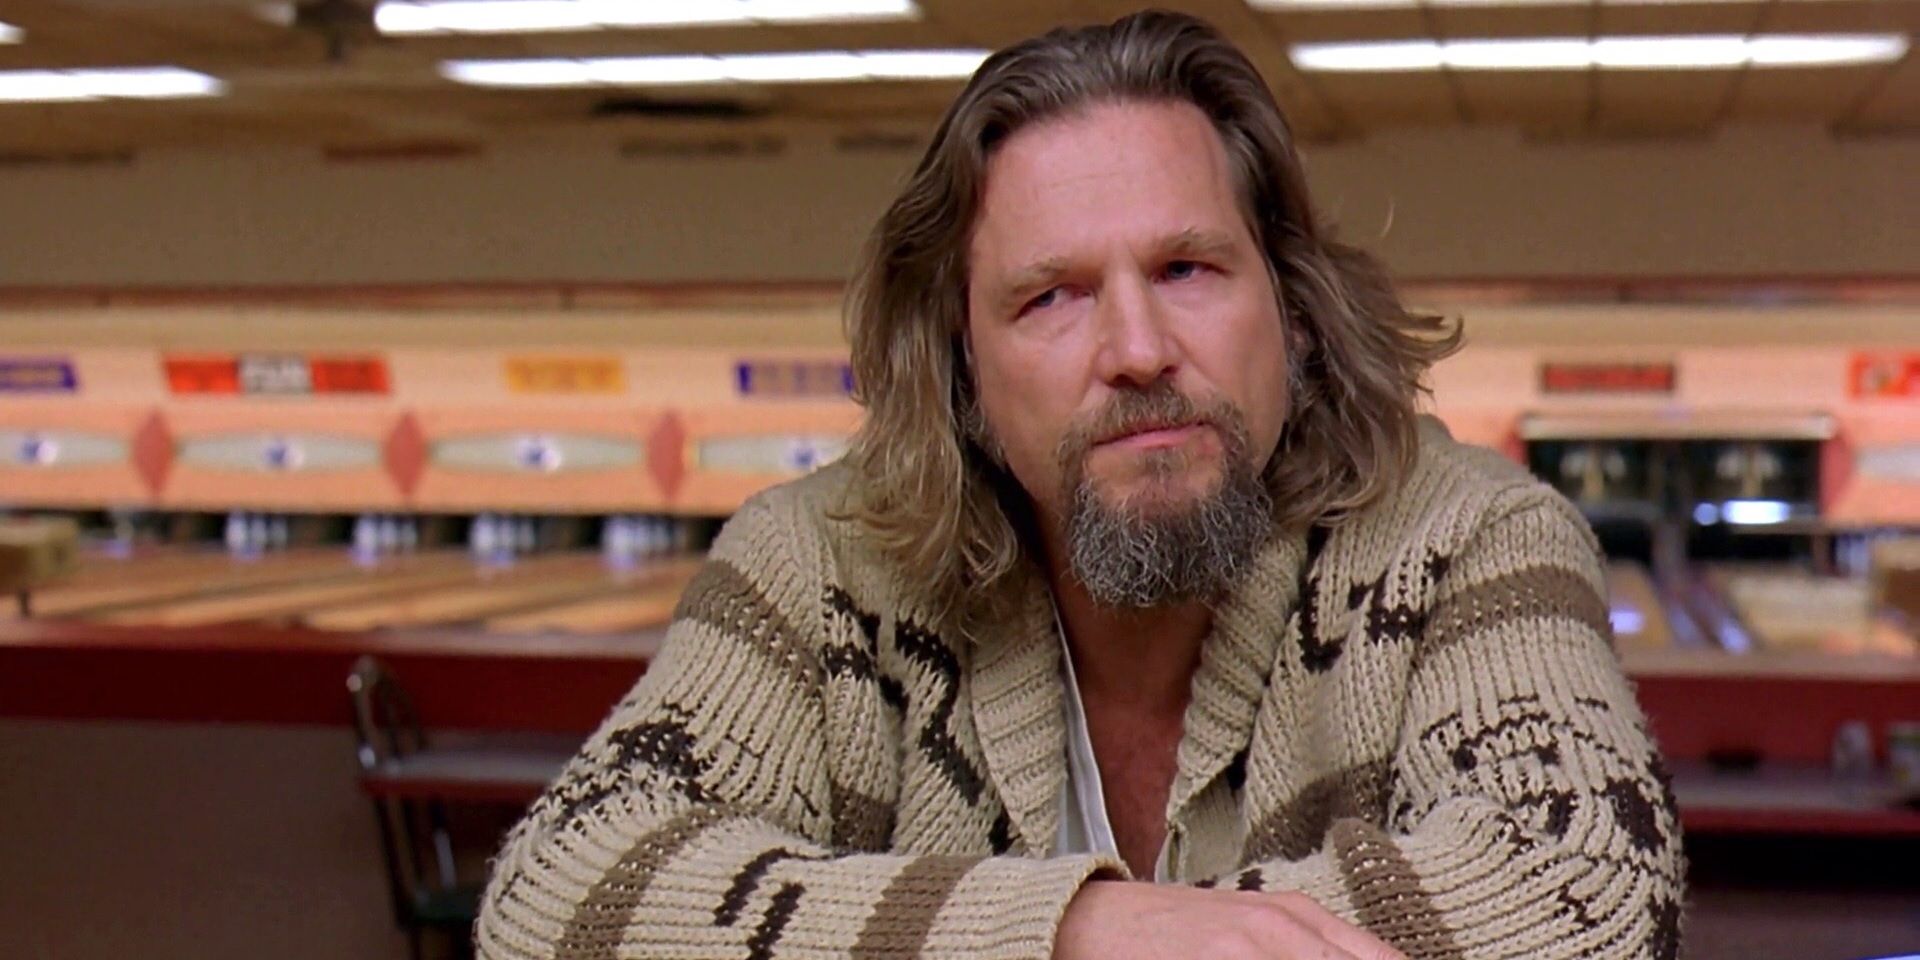 Jeff Bridges as the Dude at the bowling alley bar in The Big Lebowski